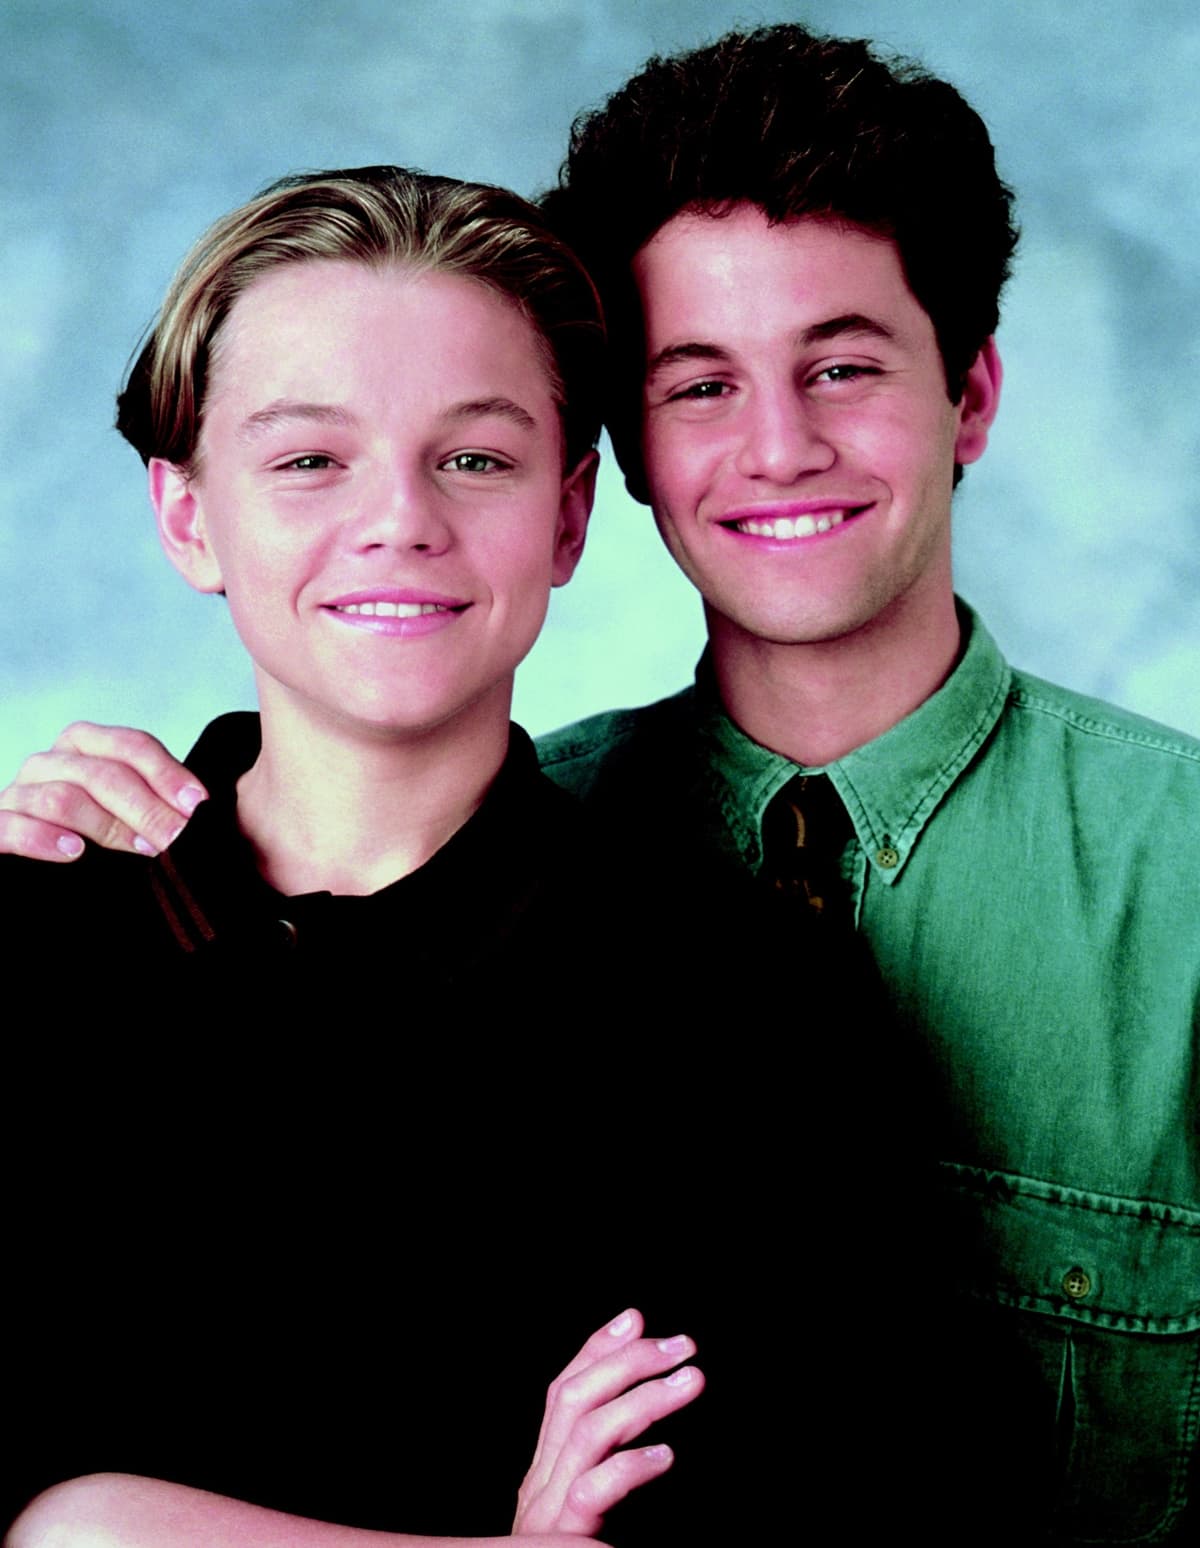 Leonardo DiCaprio and Kirk Cameron starred together in the American television sitcom Growing Pains